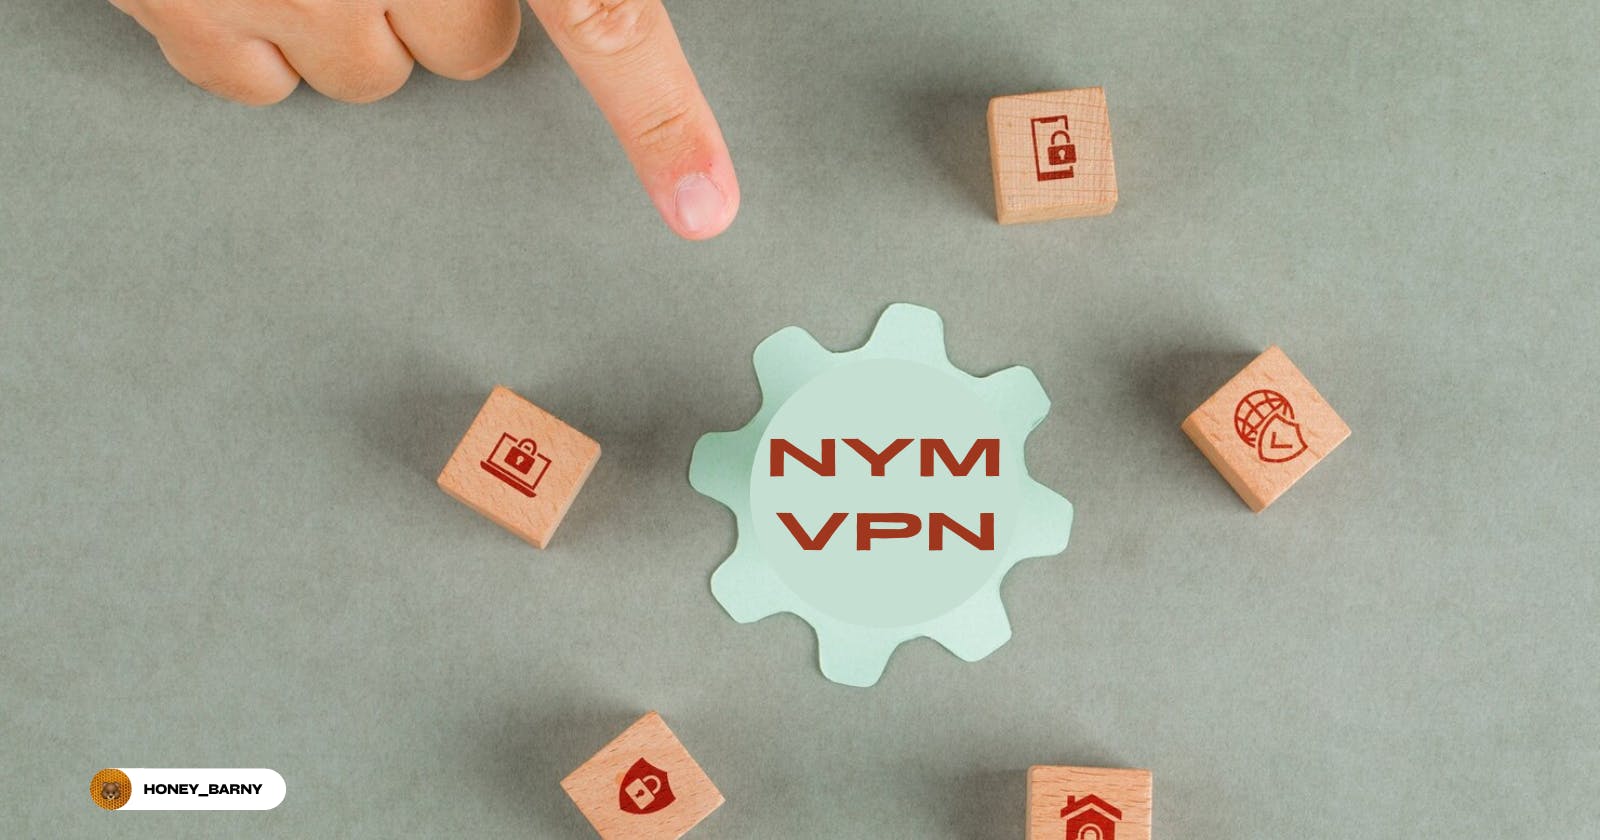 Comparative Analysis: NymVPN in the Privacy Tools Landscape